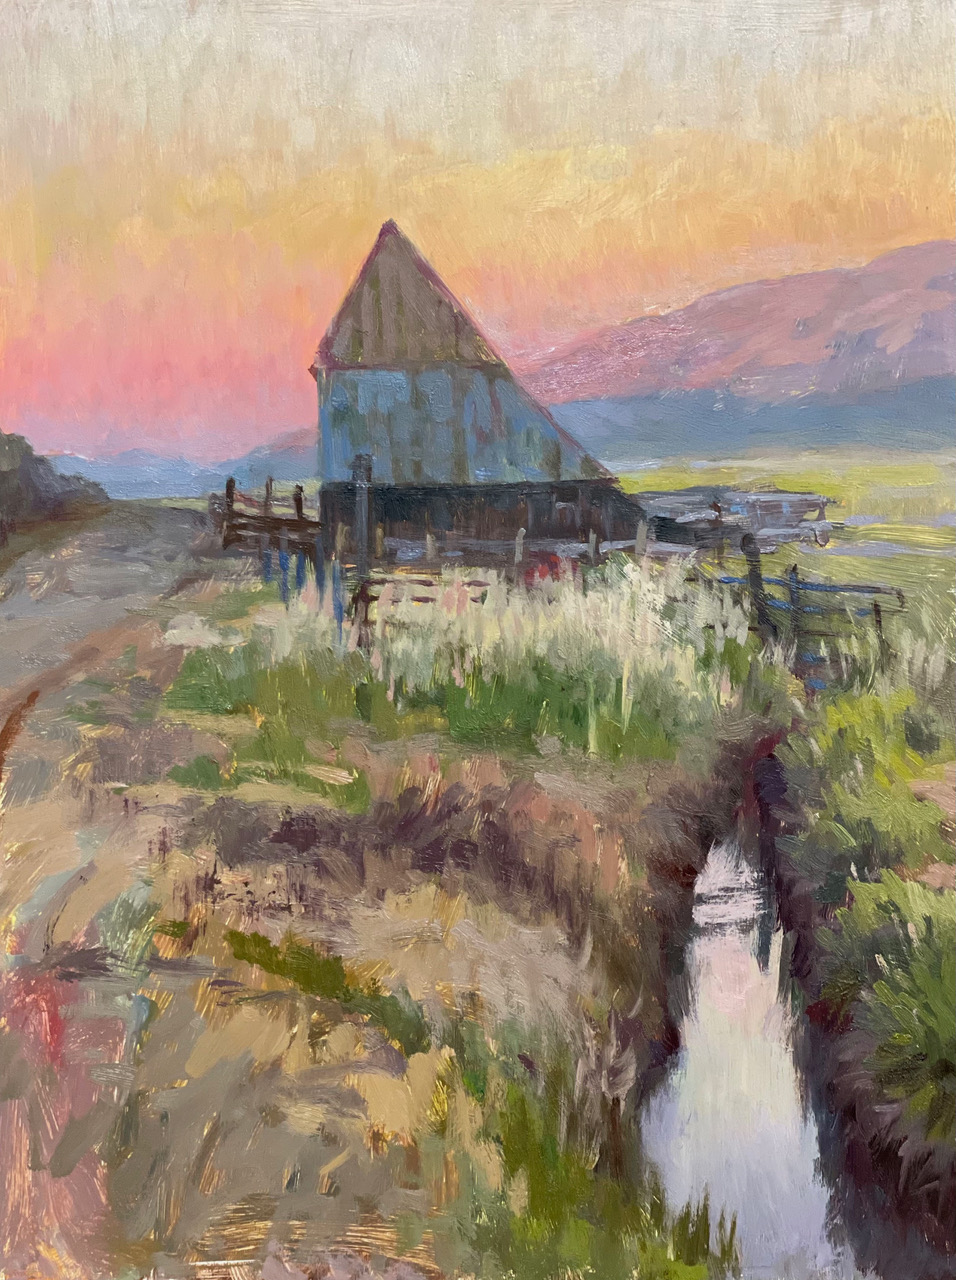 Play of Light and Shadows: Oil Painting in the Sierra | Sierra